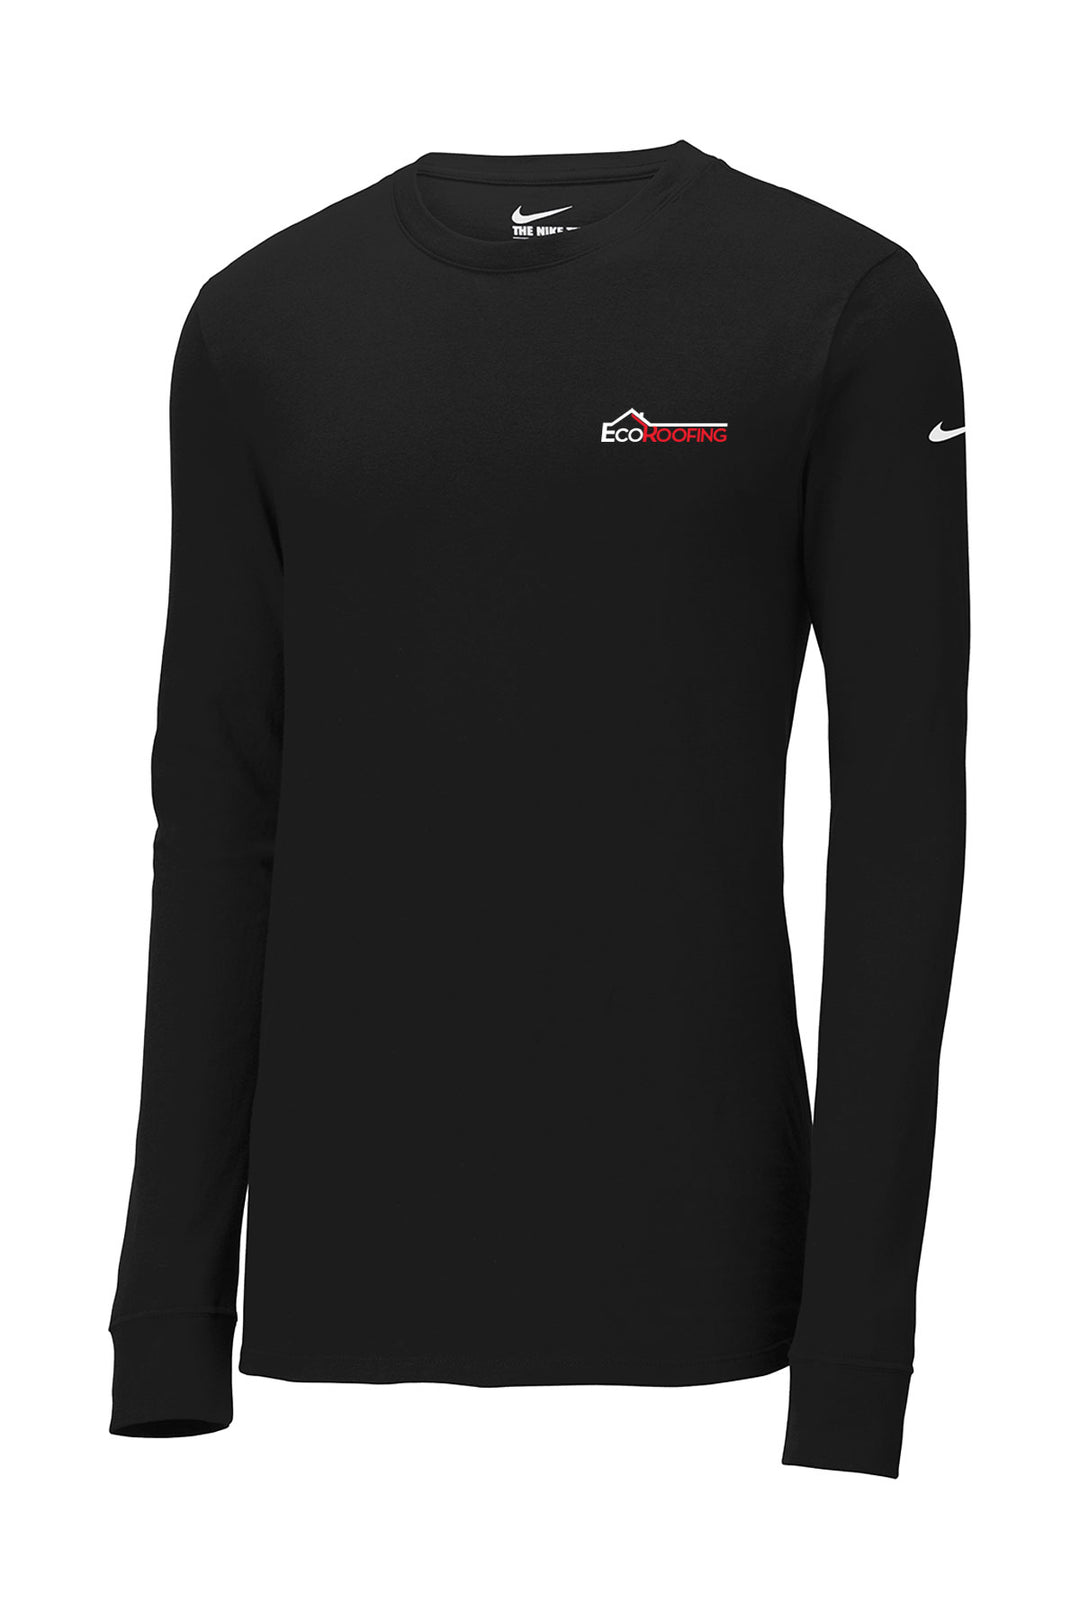 Dri-FIT Cotton/Poly Long Sleeve Tee